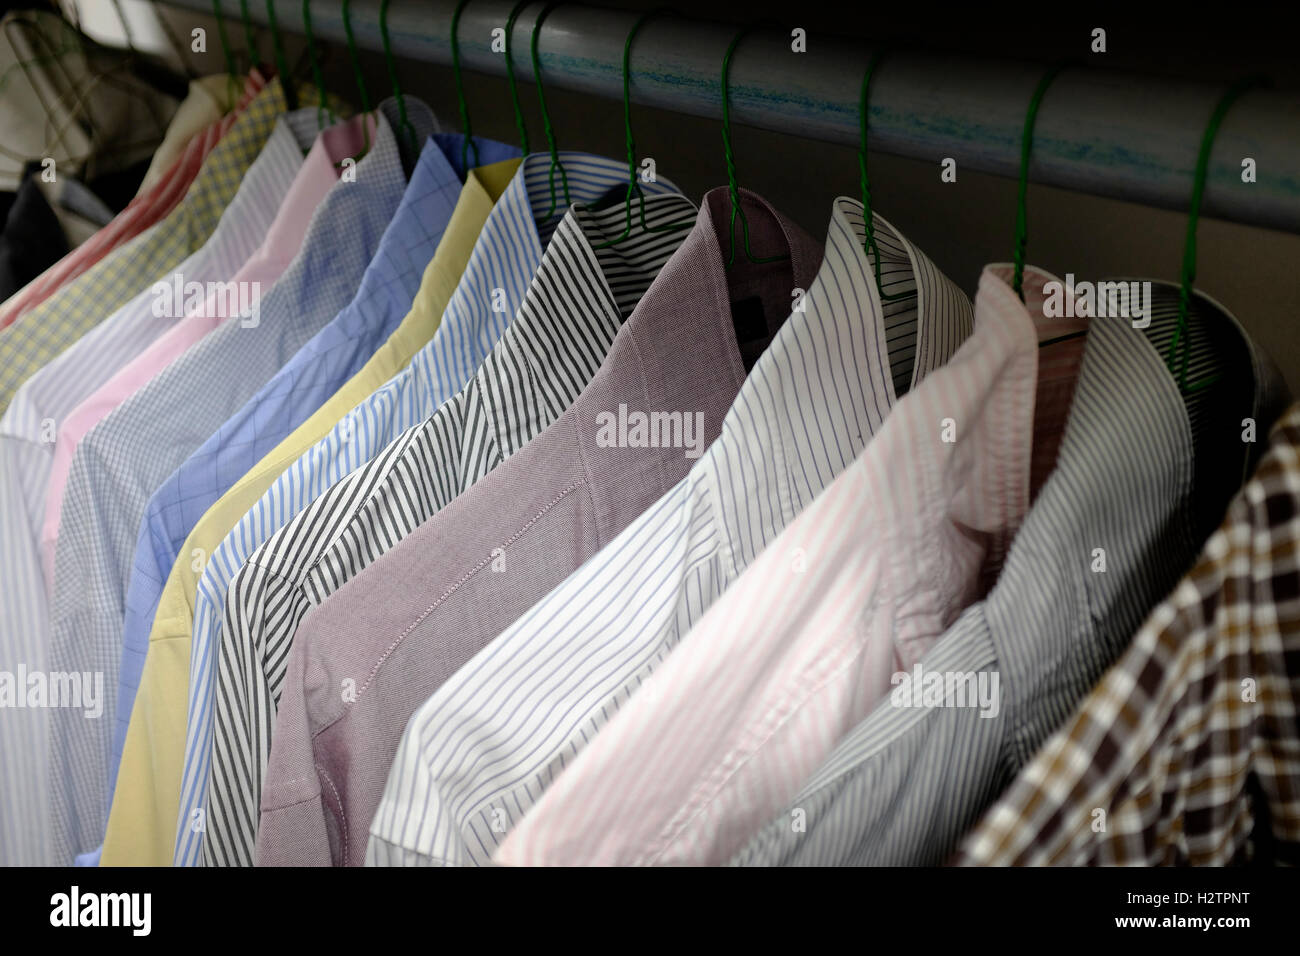 Row of dress shirts hanging on hangers in closet choice of clothing Stock Photo